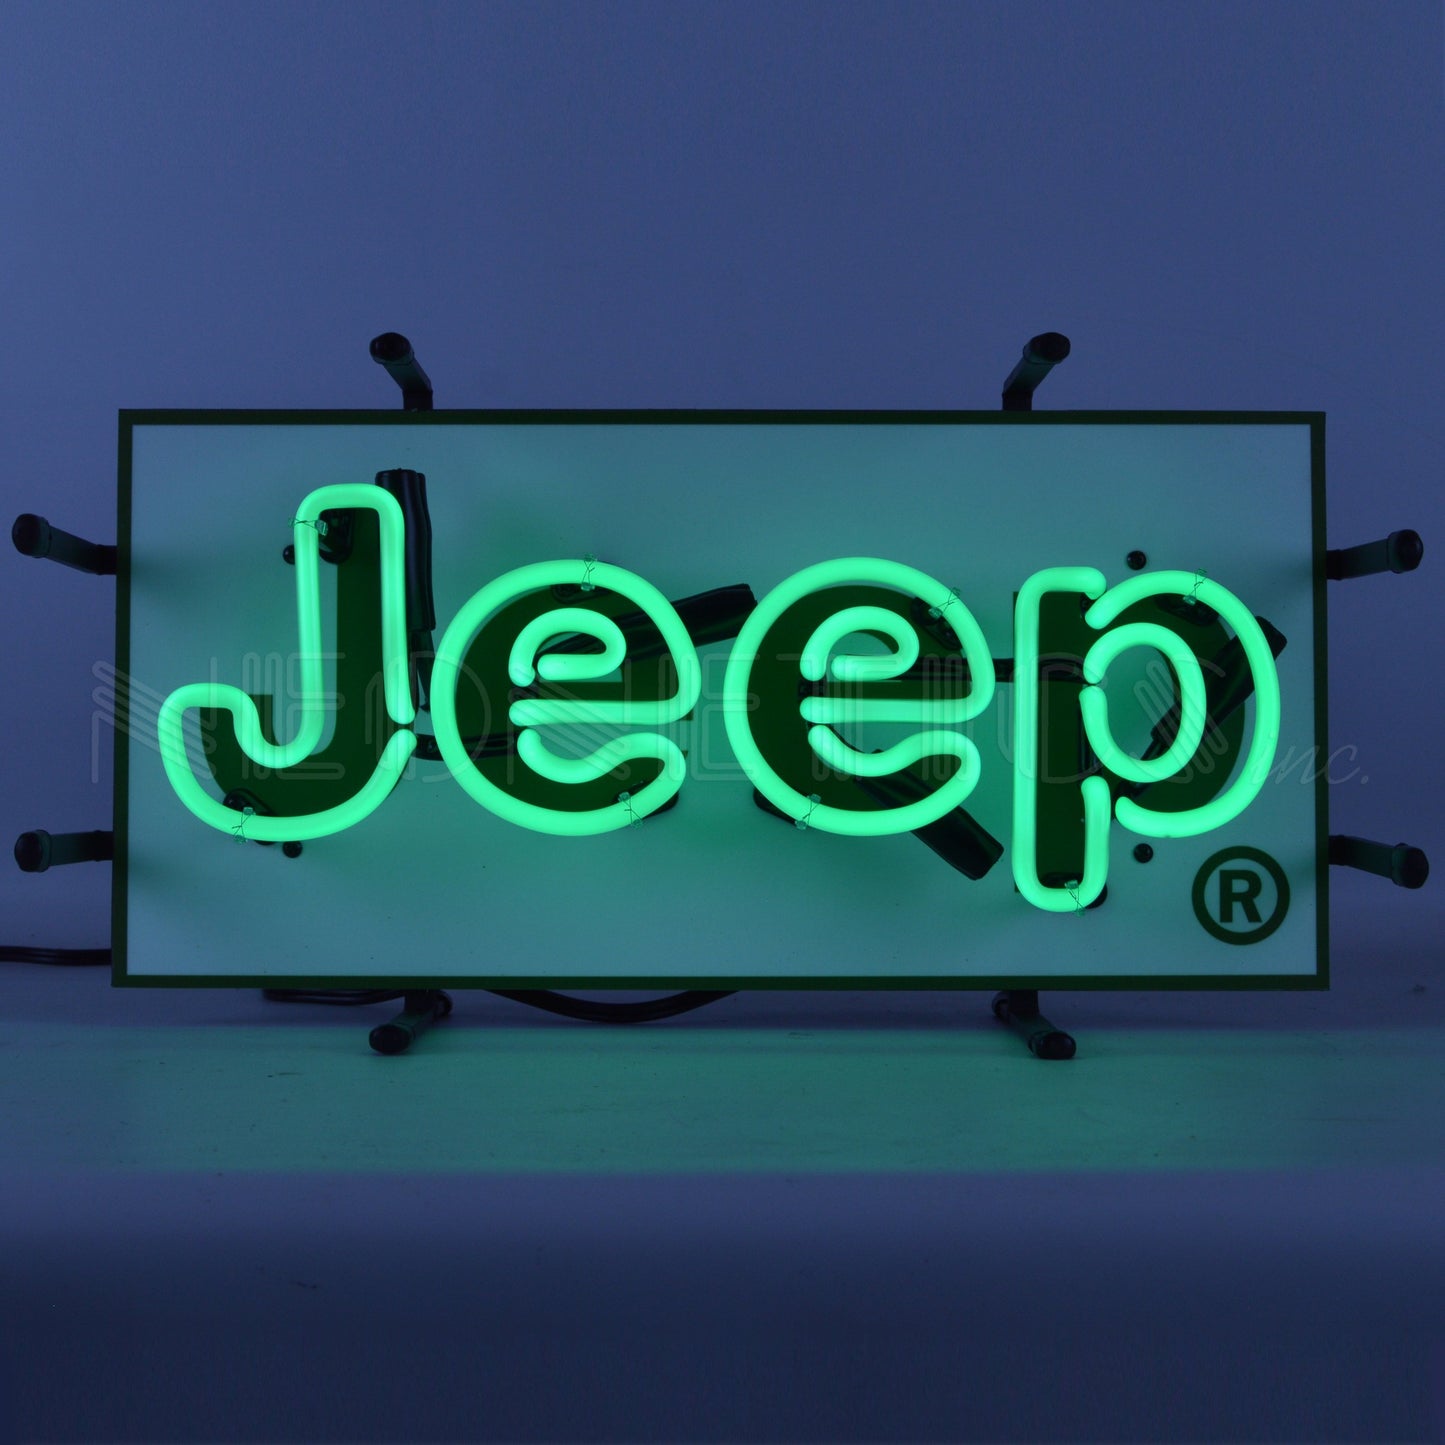 Jeep Green Junior Neon Sign featuring the iconic Jeep logo in vibrant green neon, perfect for adding a touch of adventure to any wall.